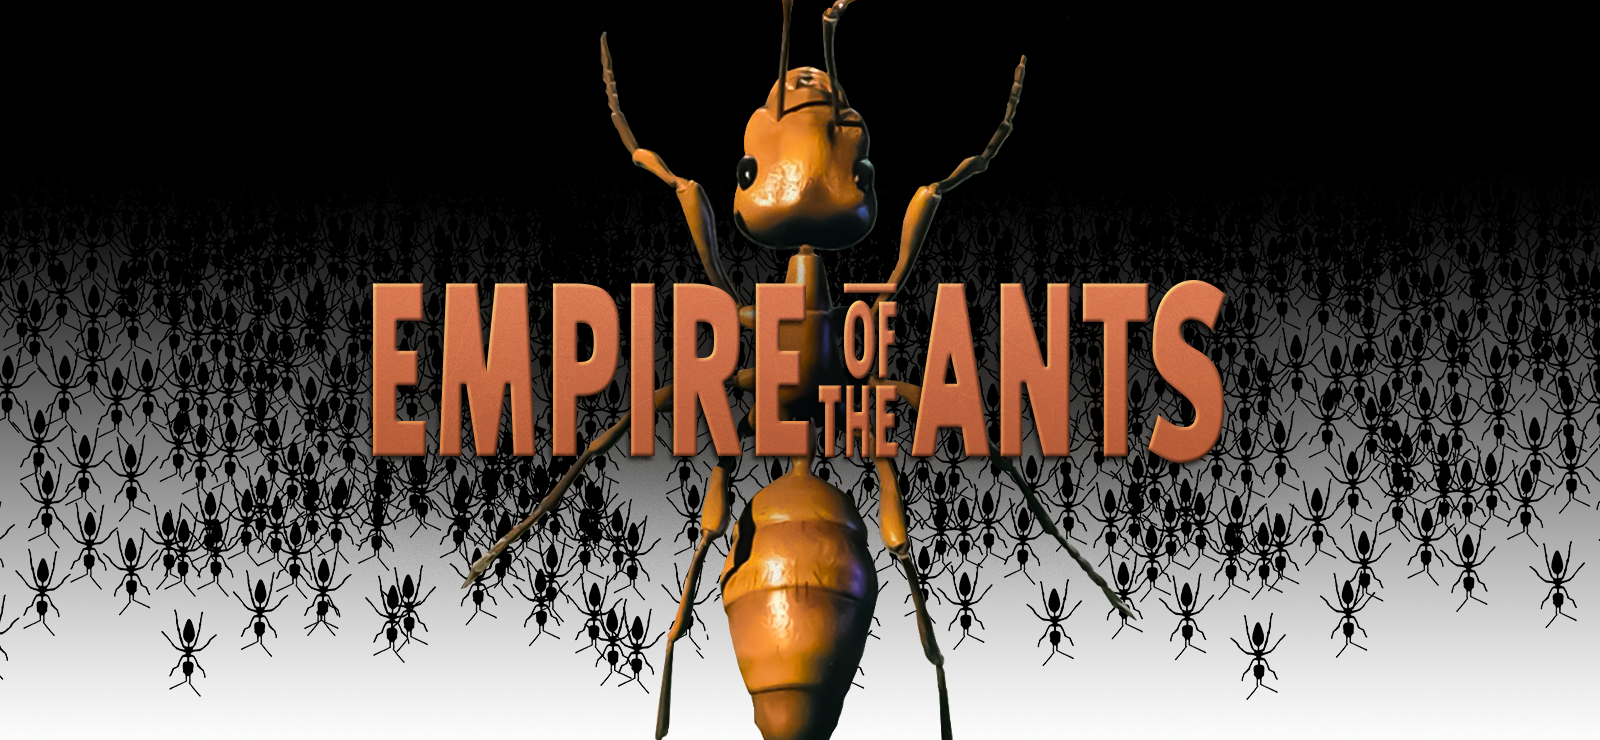 Empire Of The Ants (2000)